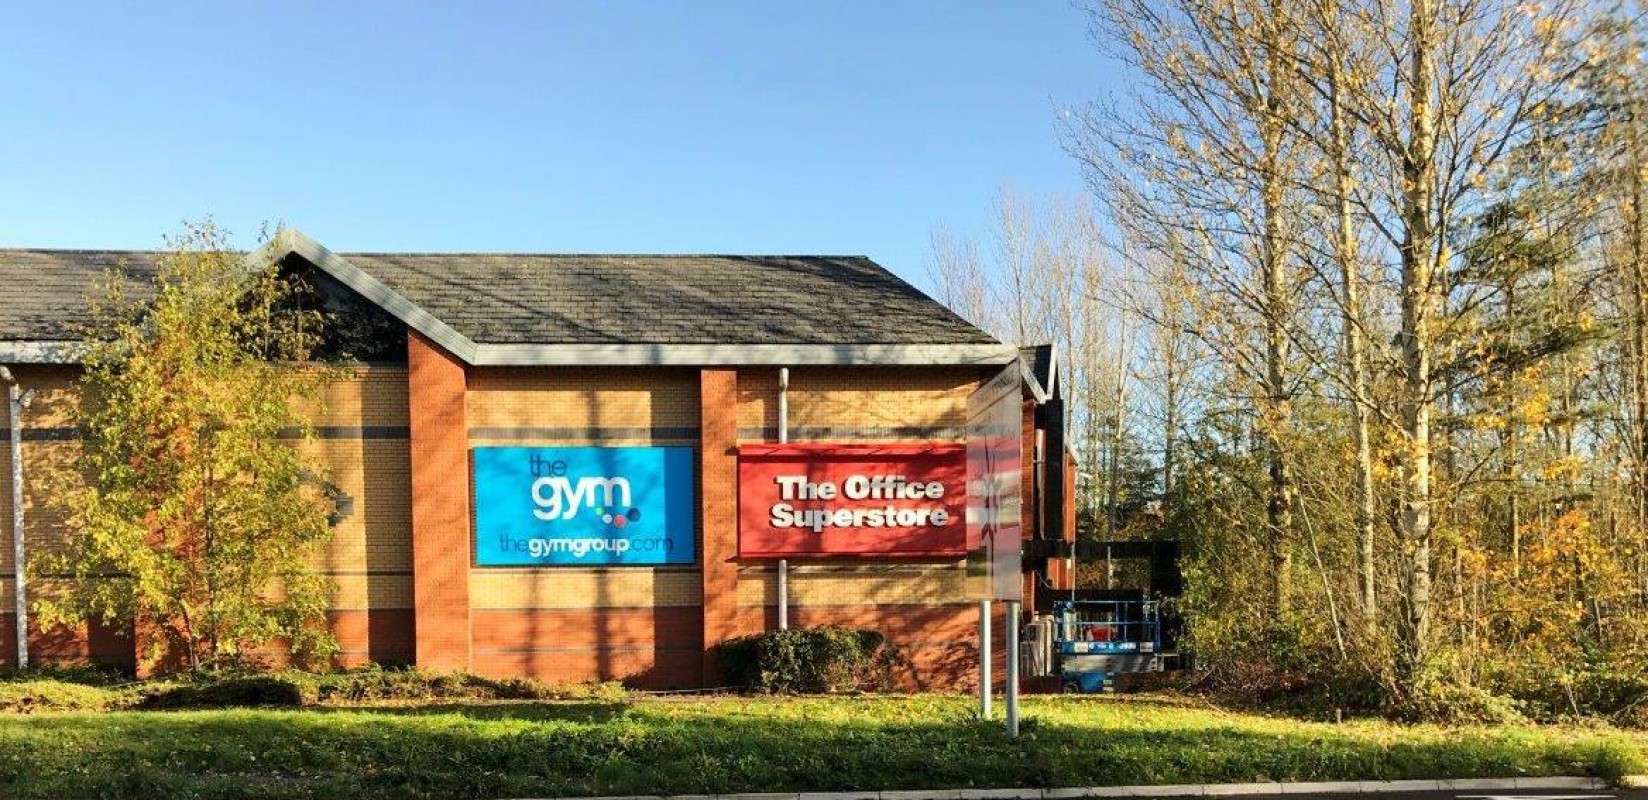 The Gym Group Telford